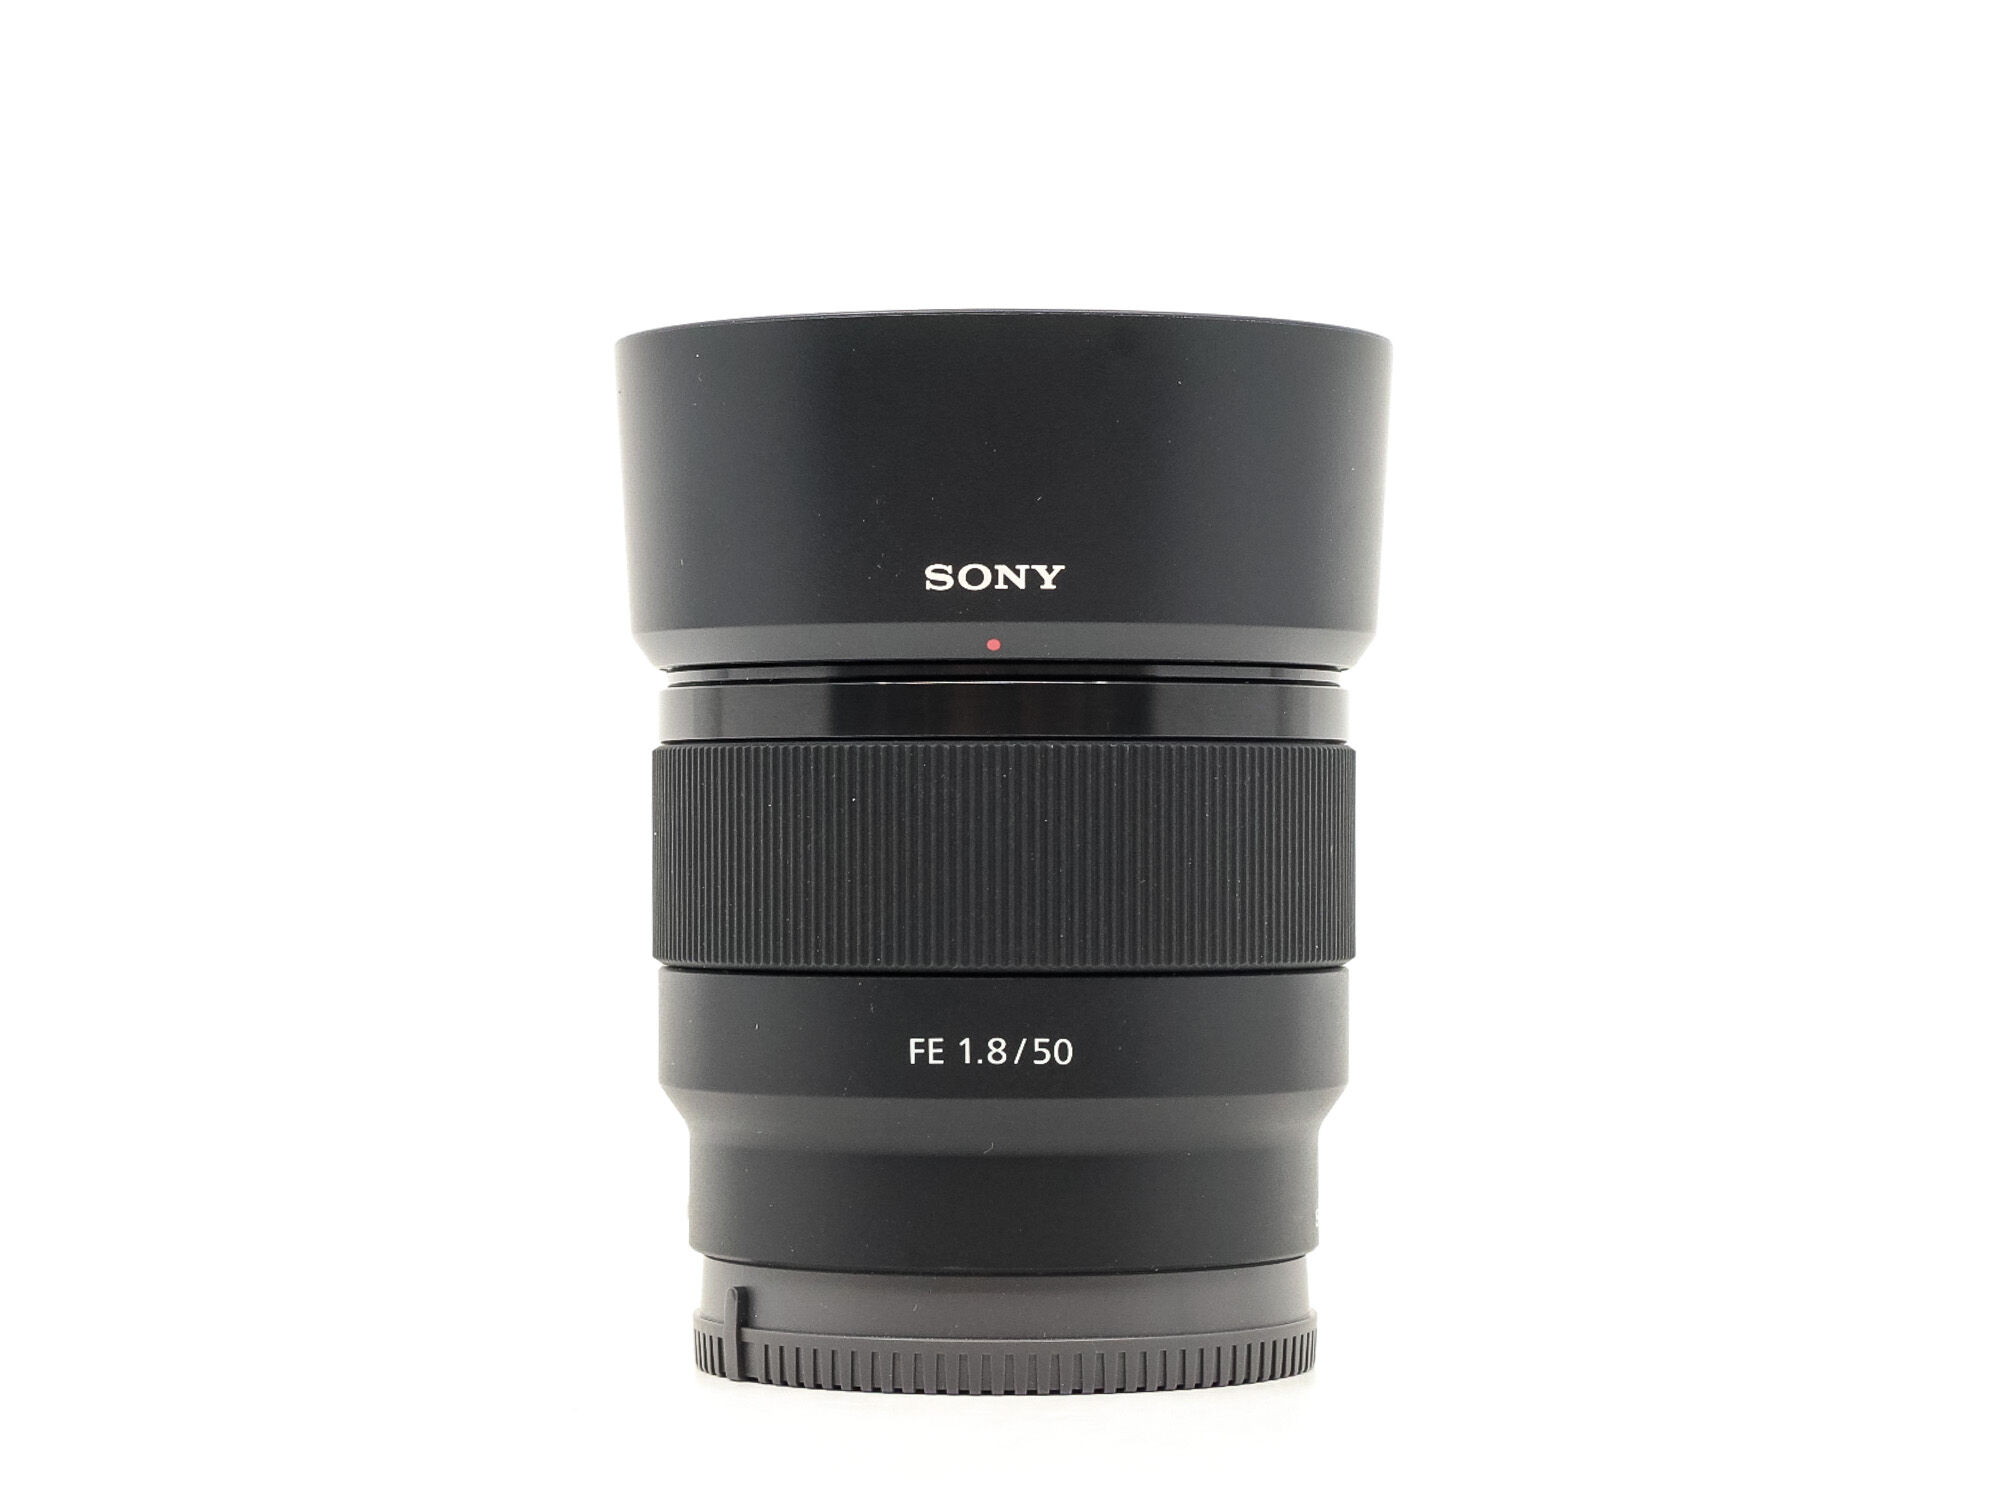 Sony FE 50mm f/1.8 (Condition: Excellent)